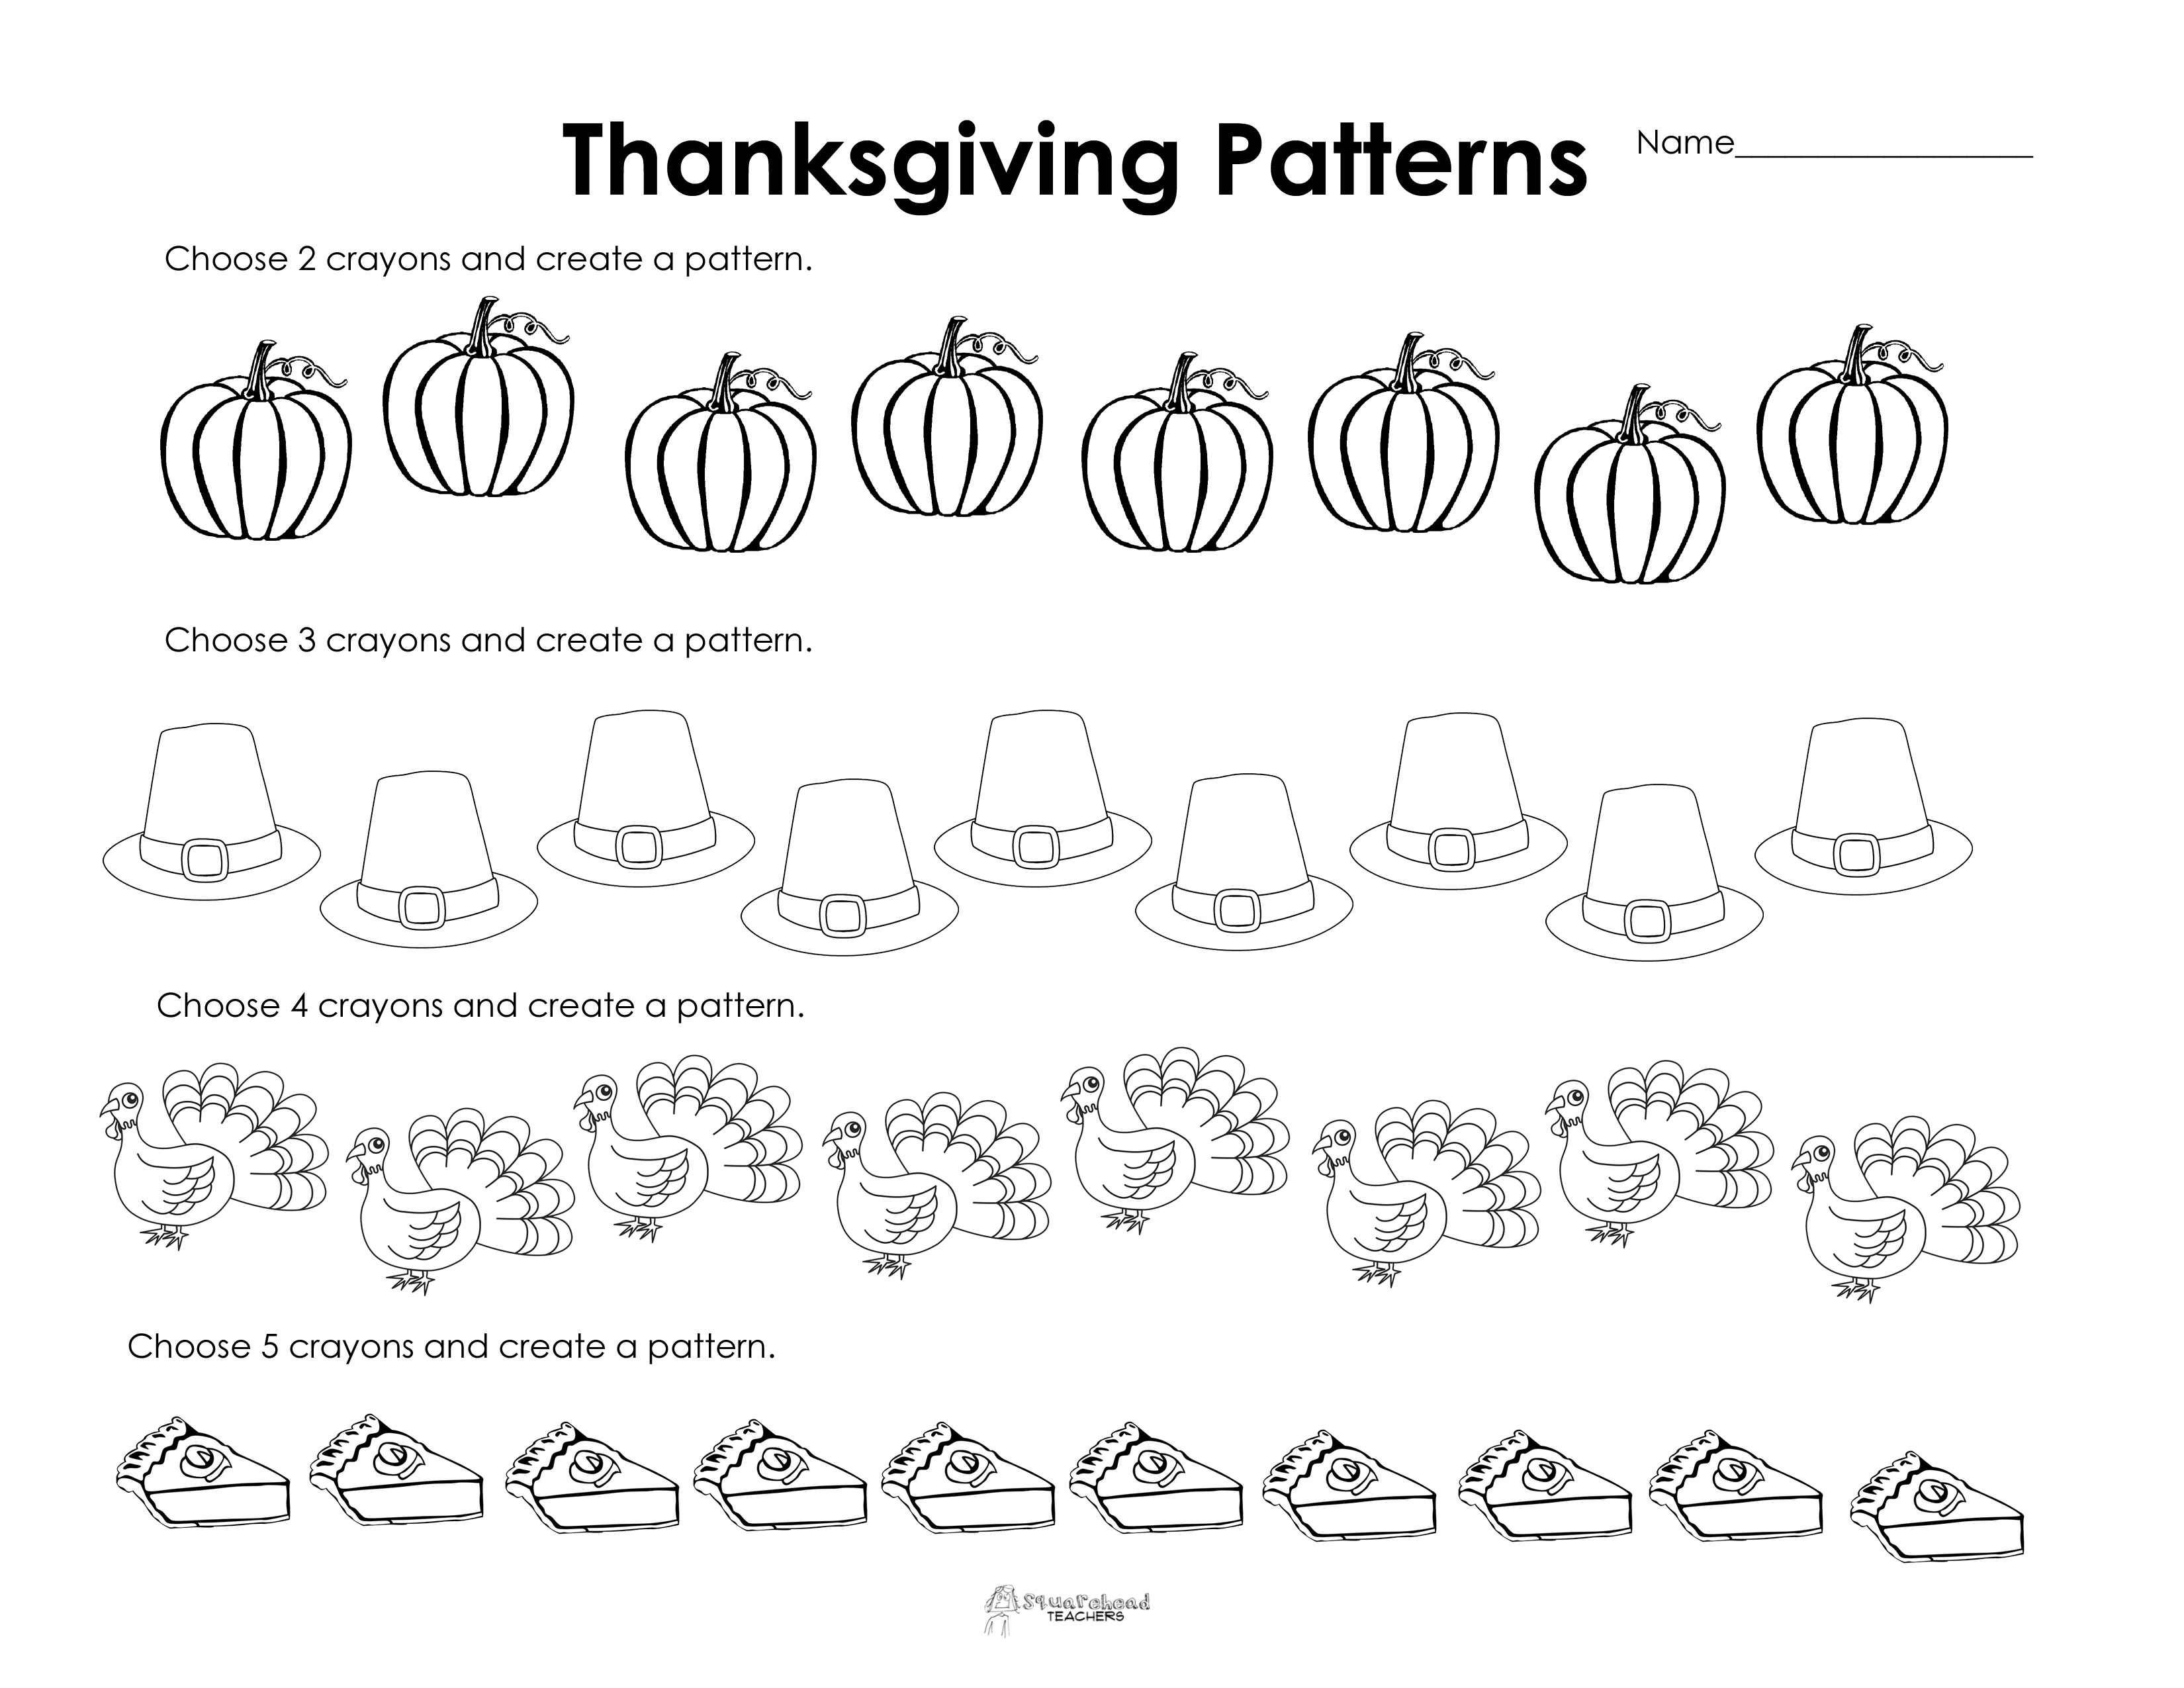 Free Printable Thanksgiving Worksheets For Preschoolers - 8.13 - Free Printable Thanksgiving Worksheets